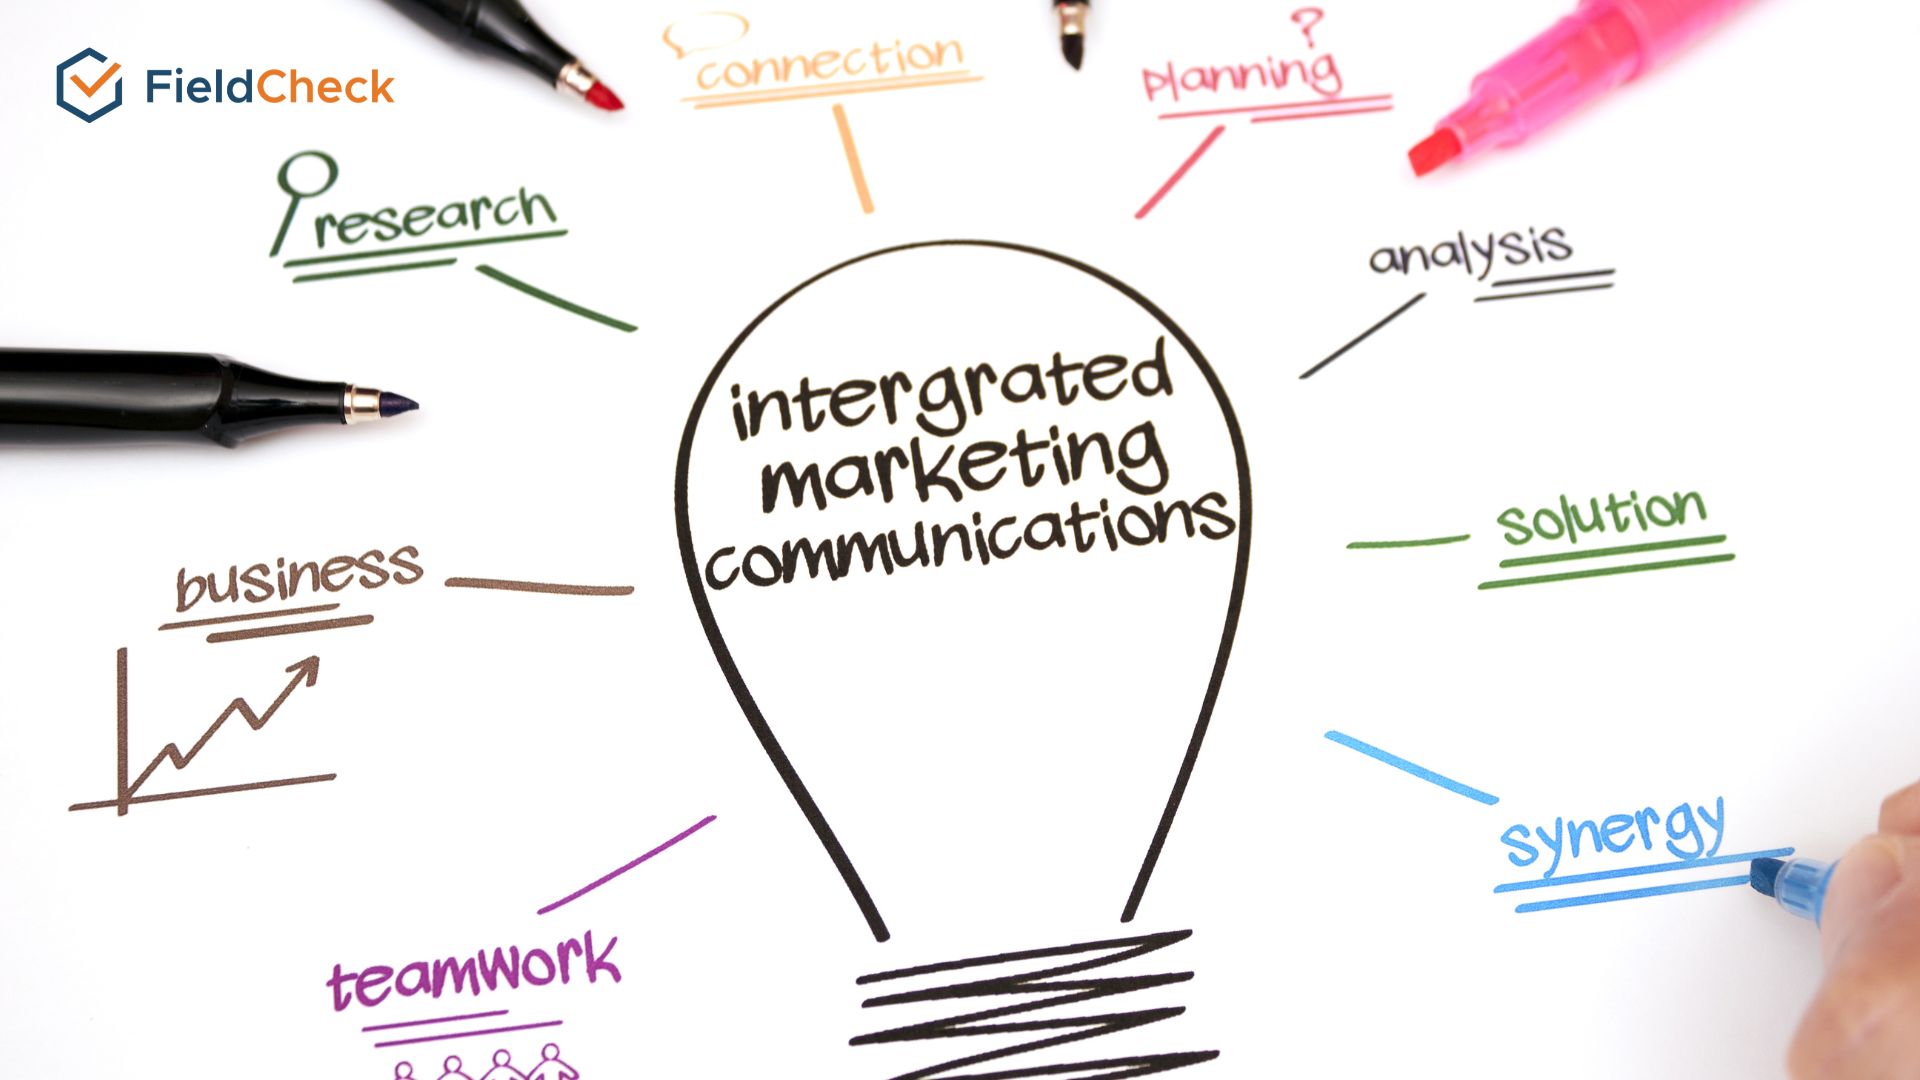 6 Steps To Planning Integrated Marketing Communications (IMC)